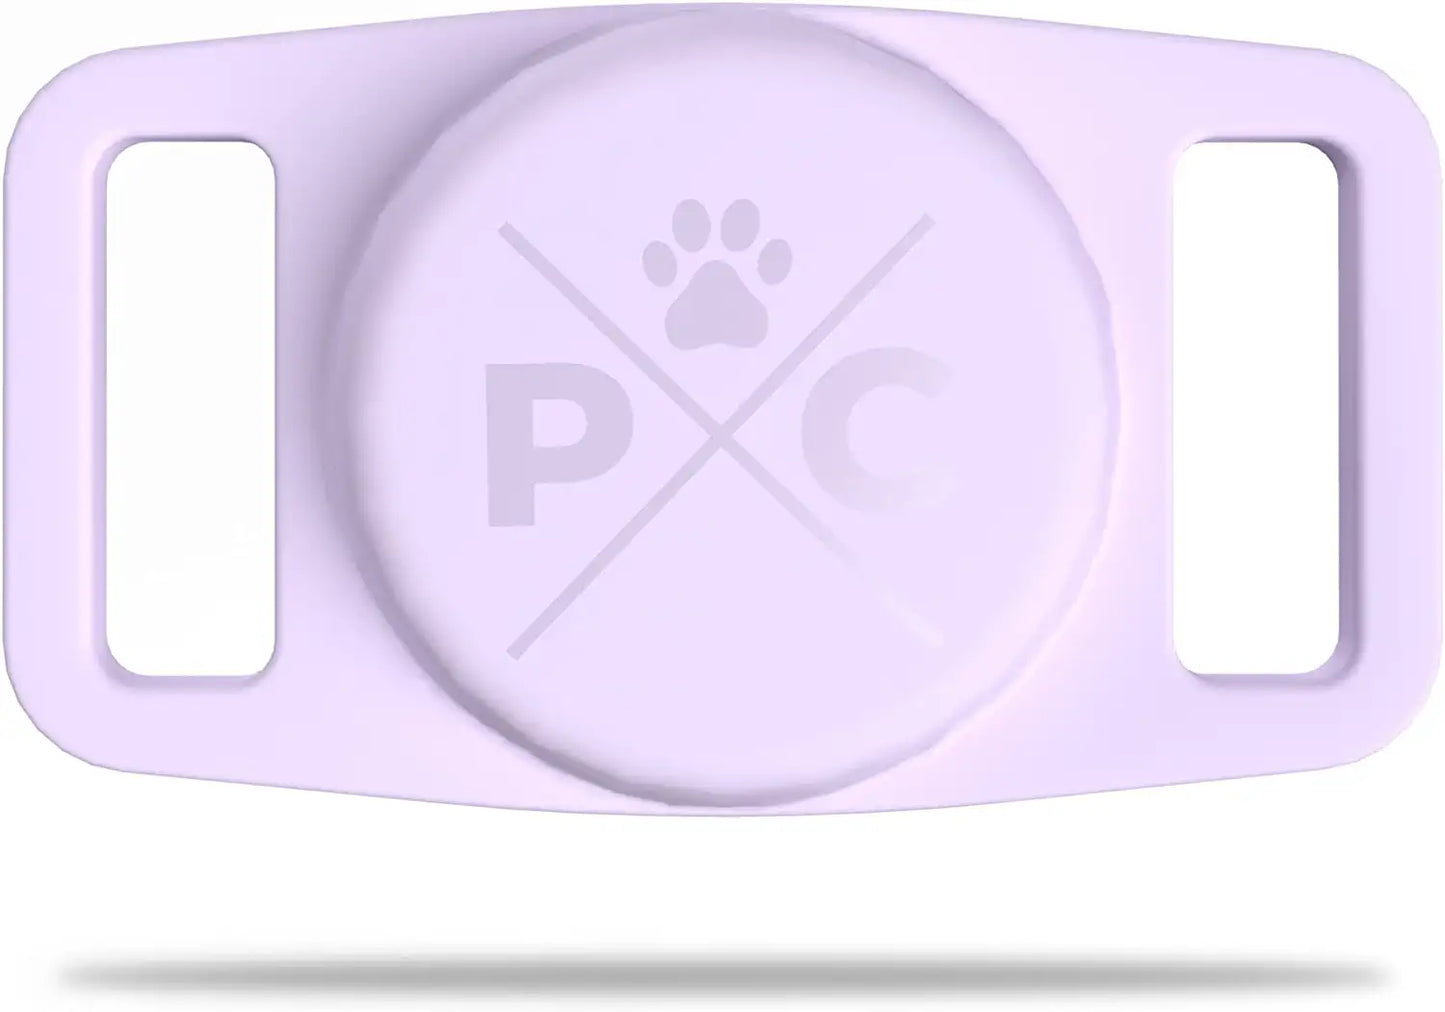 Pup Culture Airtag Dog Collar Holder, Protective Airtag Case for Dog Collar, Airtag Loop for GPS Dog Tracker, Dog Trackers for Apple Iphone, Airtag Pet, Dog Airtag Holder Electronics > GPS Accessories > GPS Cases Pup Culture Lavender 1 Pack 